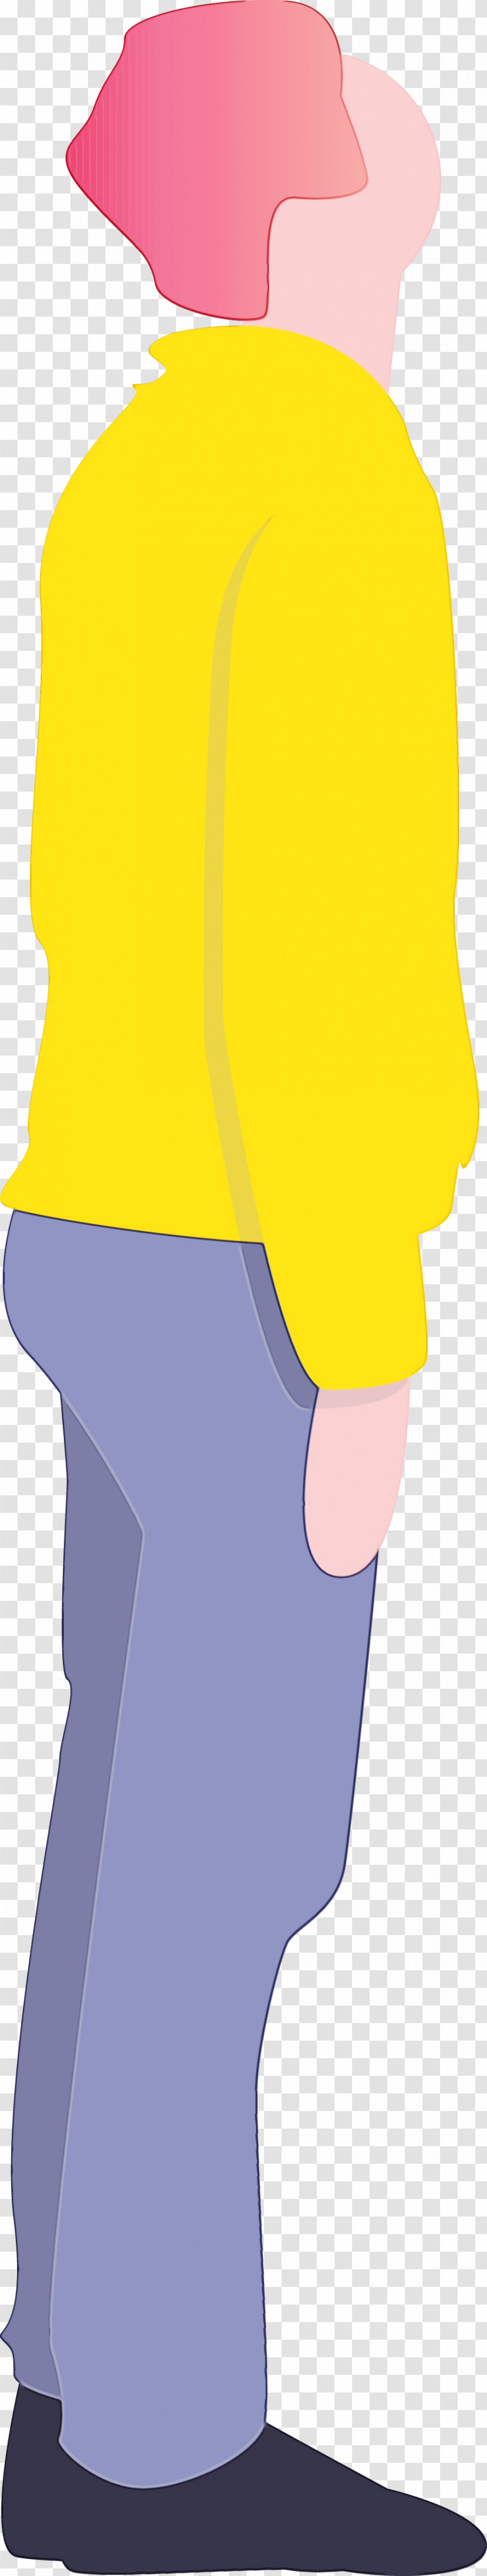 Yellow Clothing Shorts Joint Leggings Transparent PNG